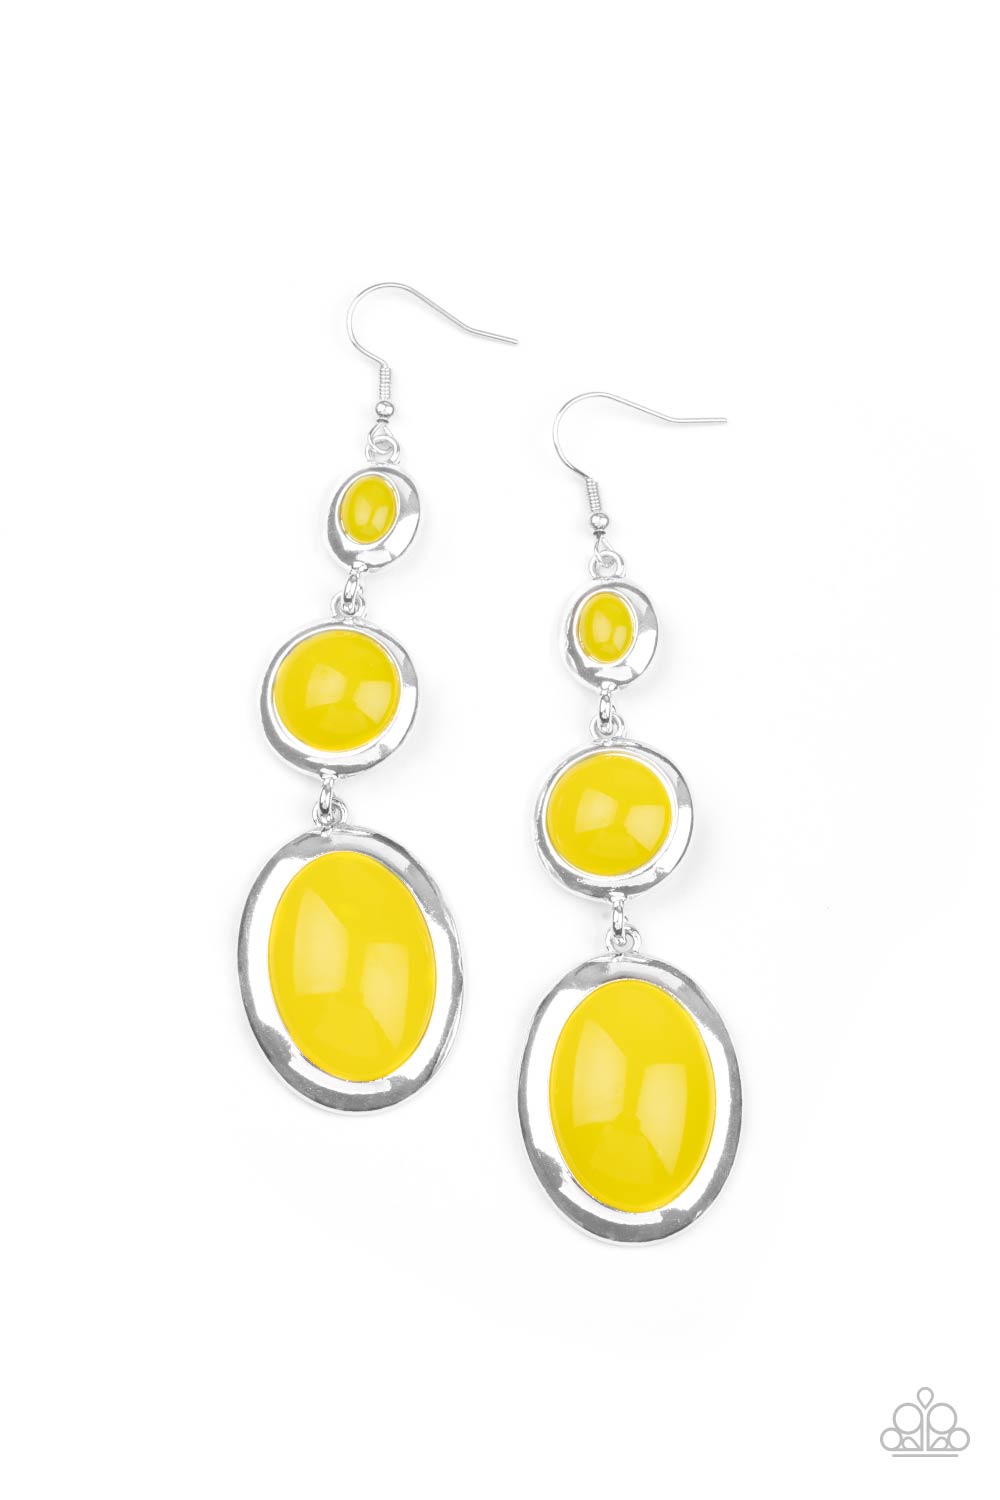 Retro Reality - Yellow and Silver Fashion Earrings - Paparazzi Jewelry - Bejeweled Accessories By Kristie - Mismatched glassy yellow beads in sleek silver frames that whimsically link into a colorfully retro lure. Fashion earrings attach to standard fishhook fittings.